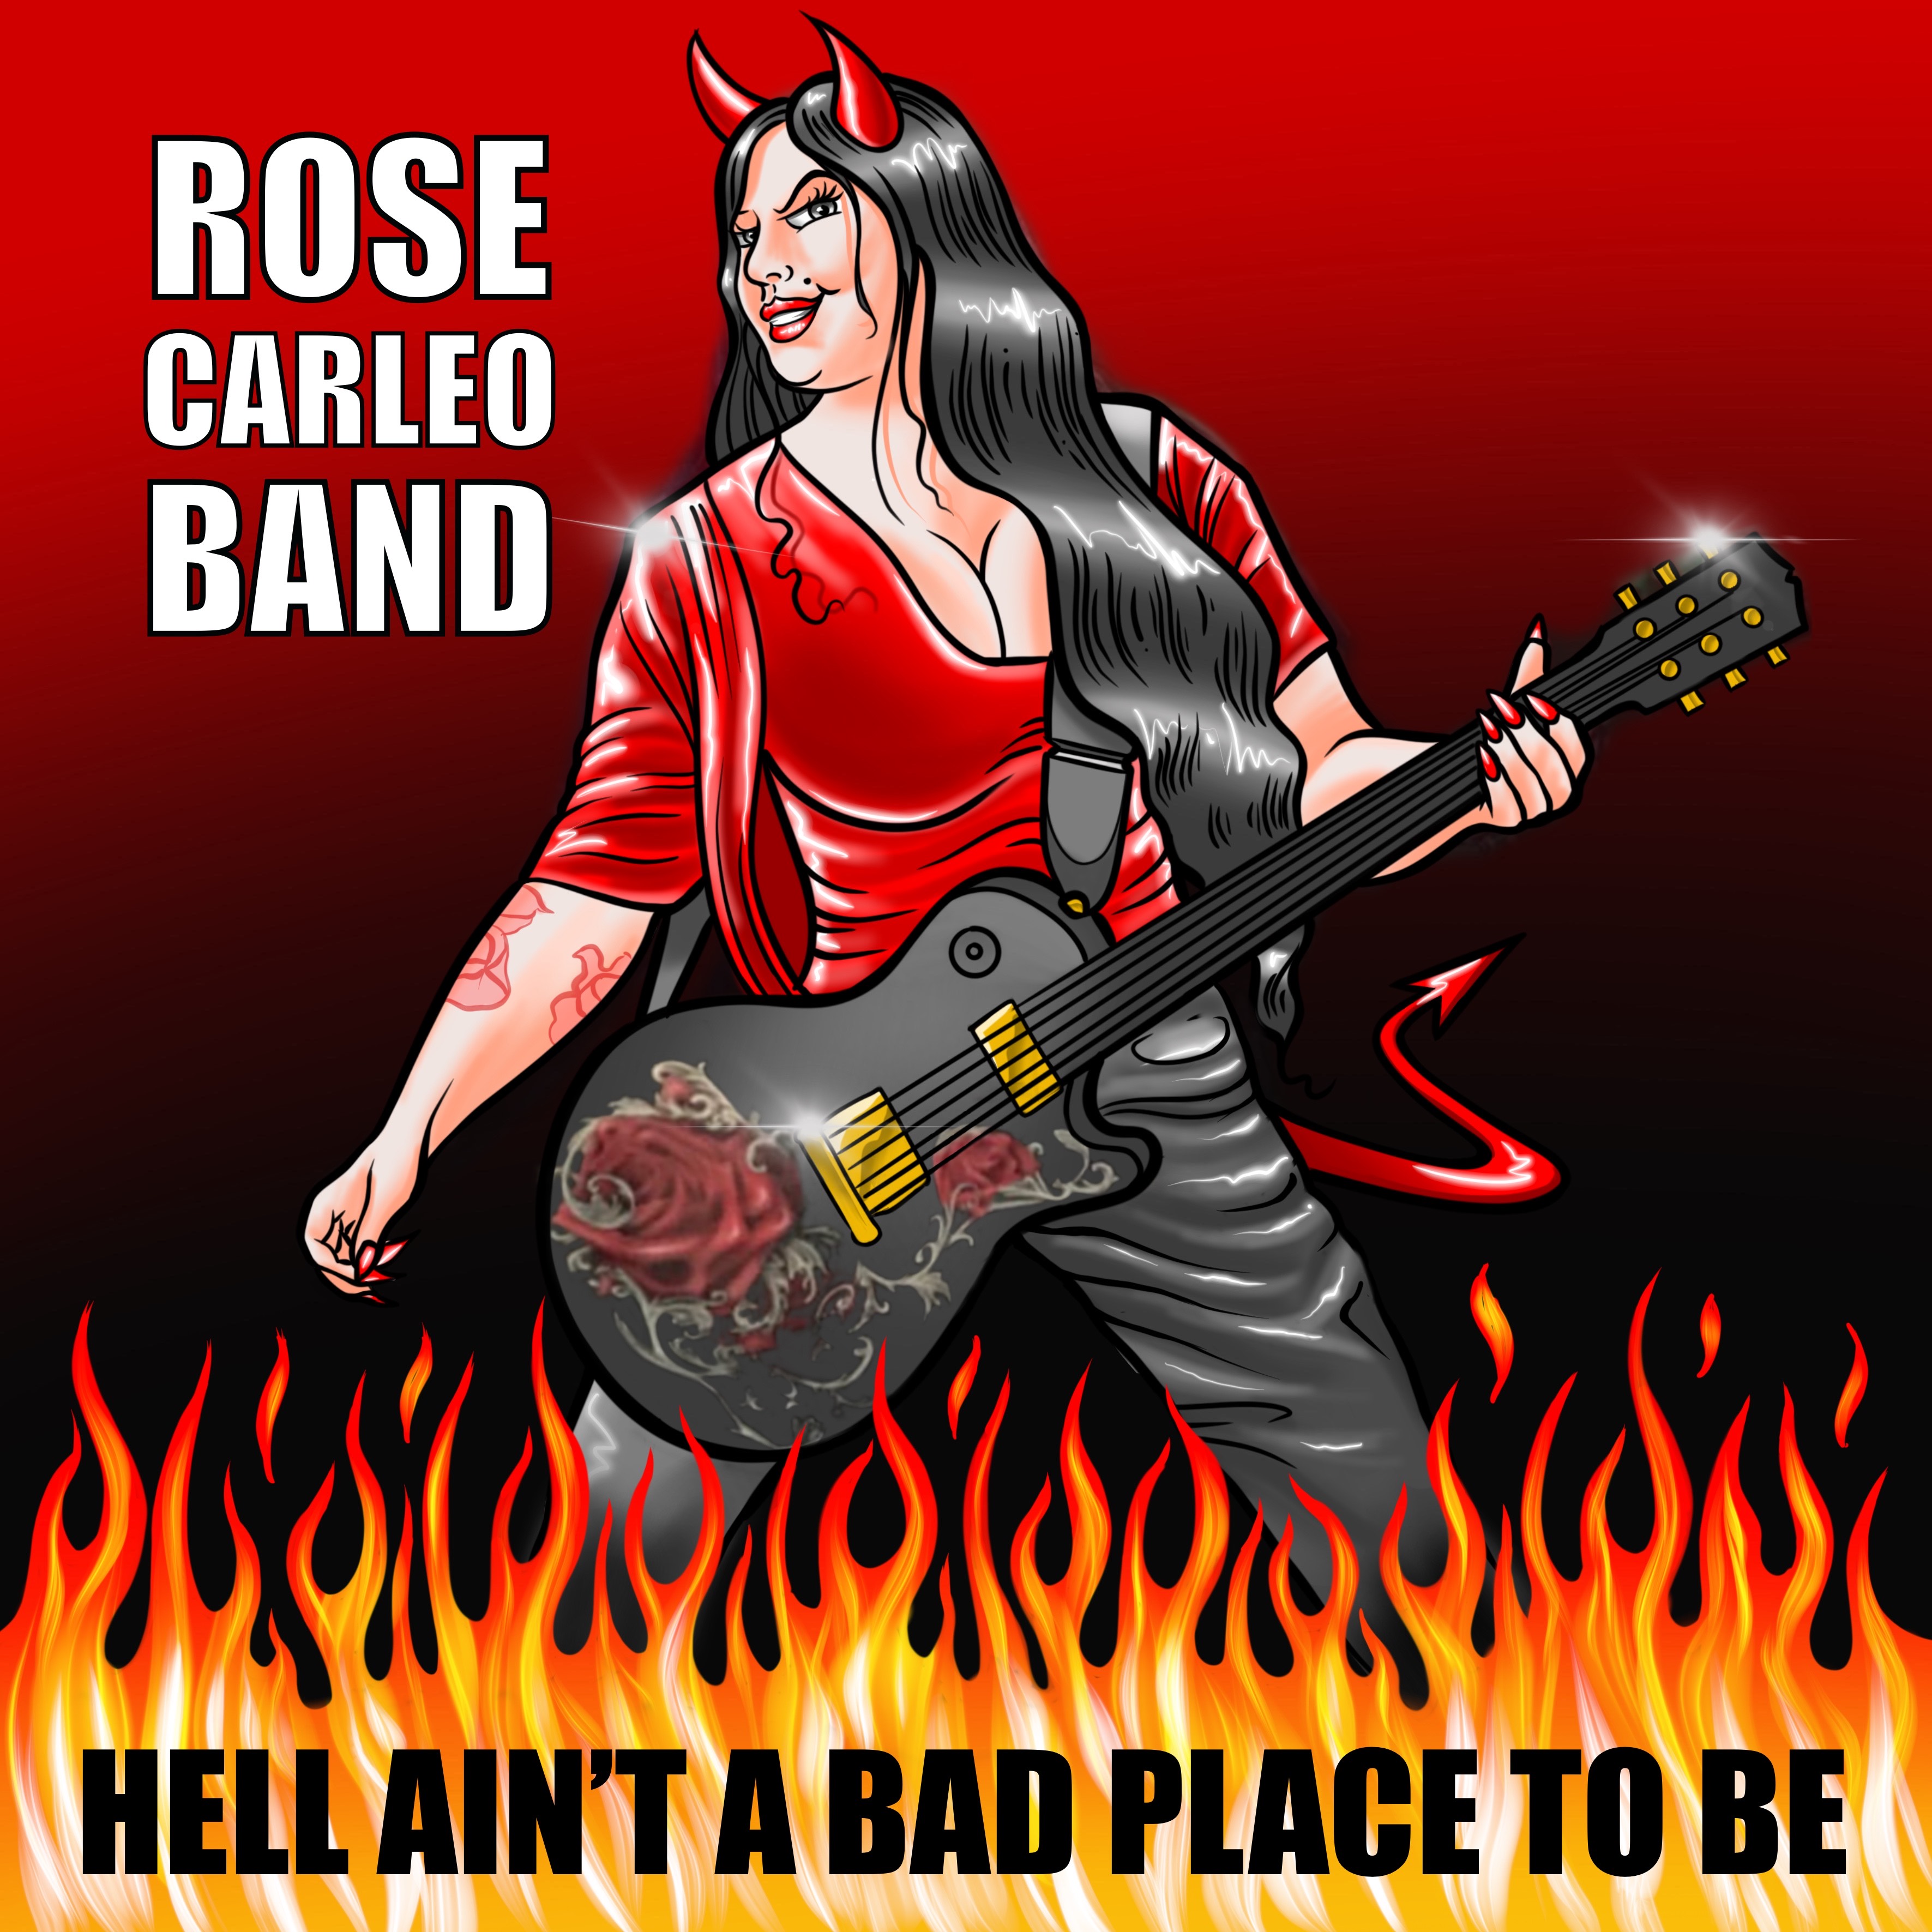 Rose Carleo Band  Hell Ain t A Bad Place to Be.jpg